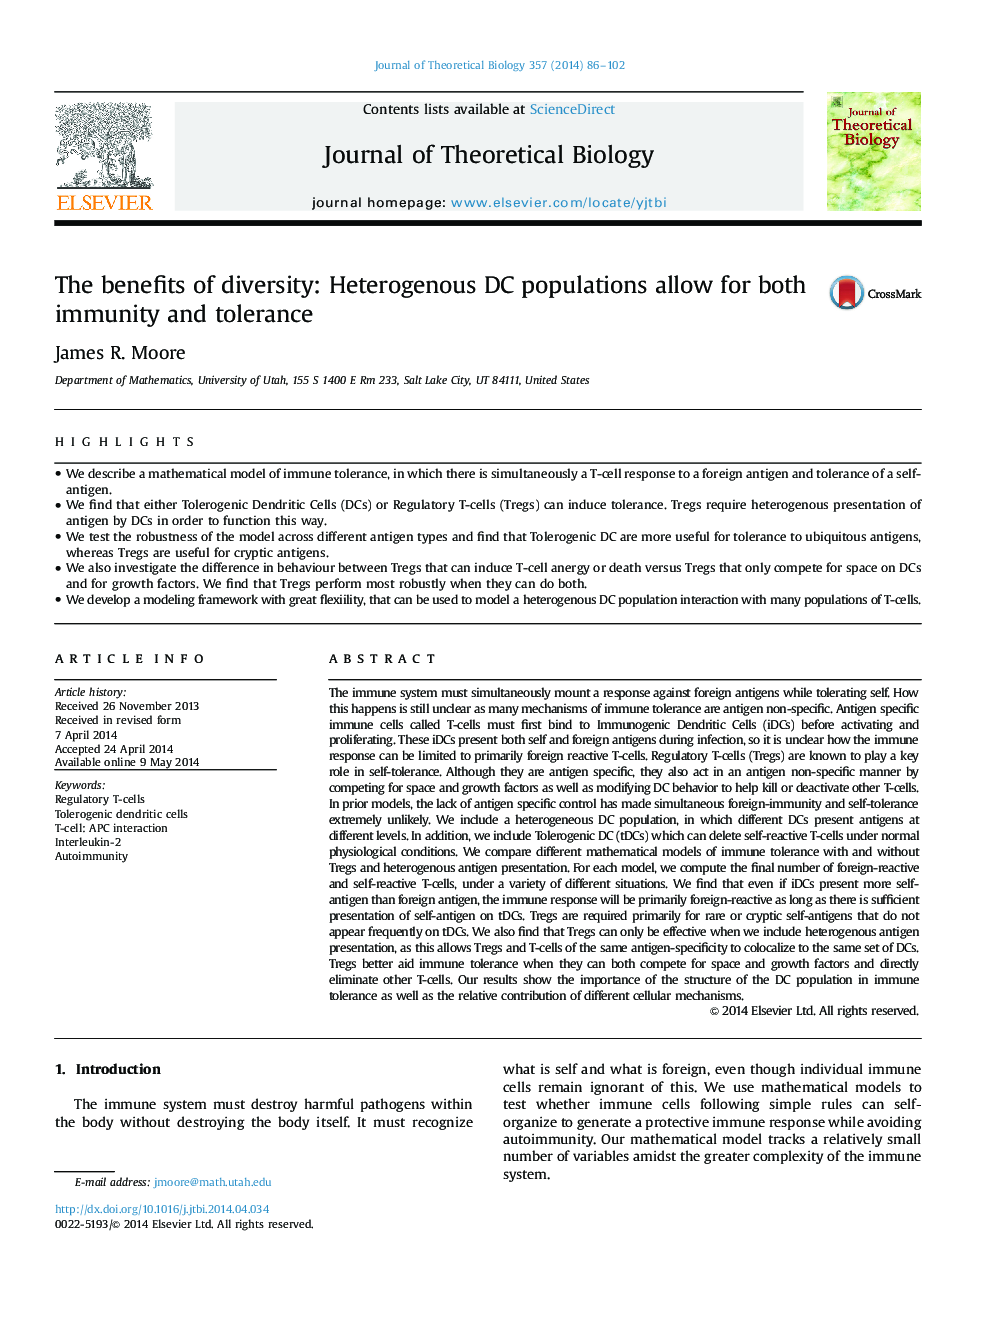 The benefits of diversity: Heterogenous DC populations allow for both immunity and tolerance